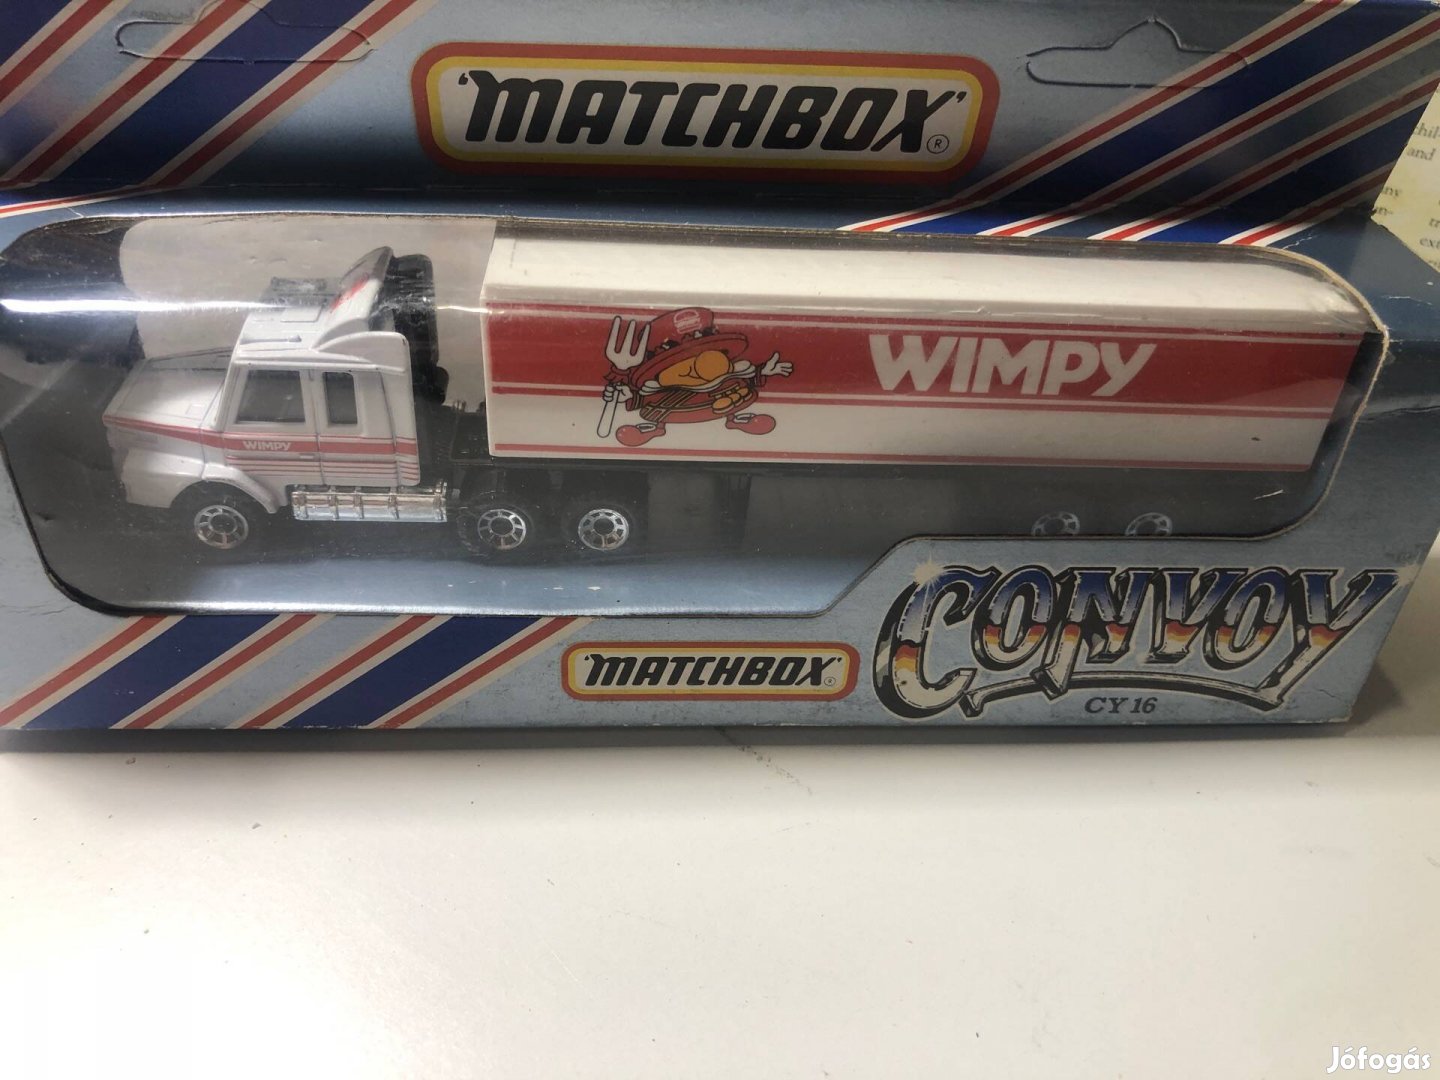 Matchbox Convoy CY-16 Scania Container Truck